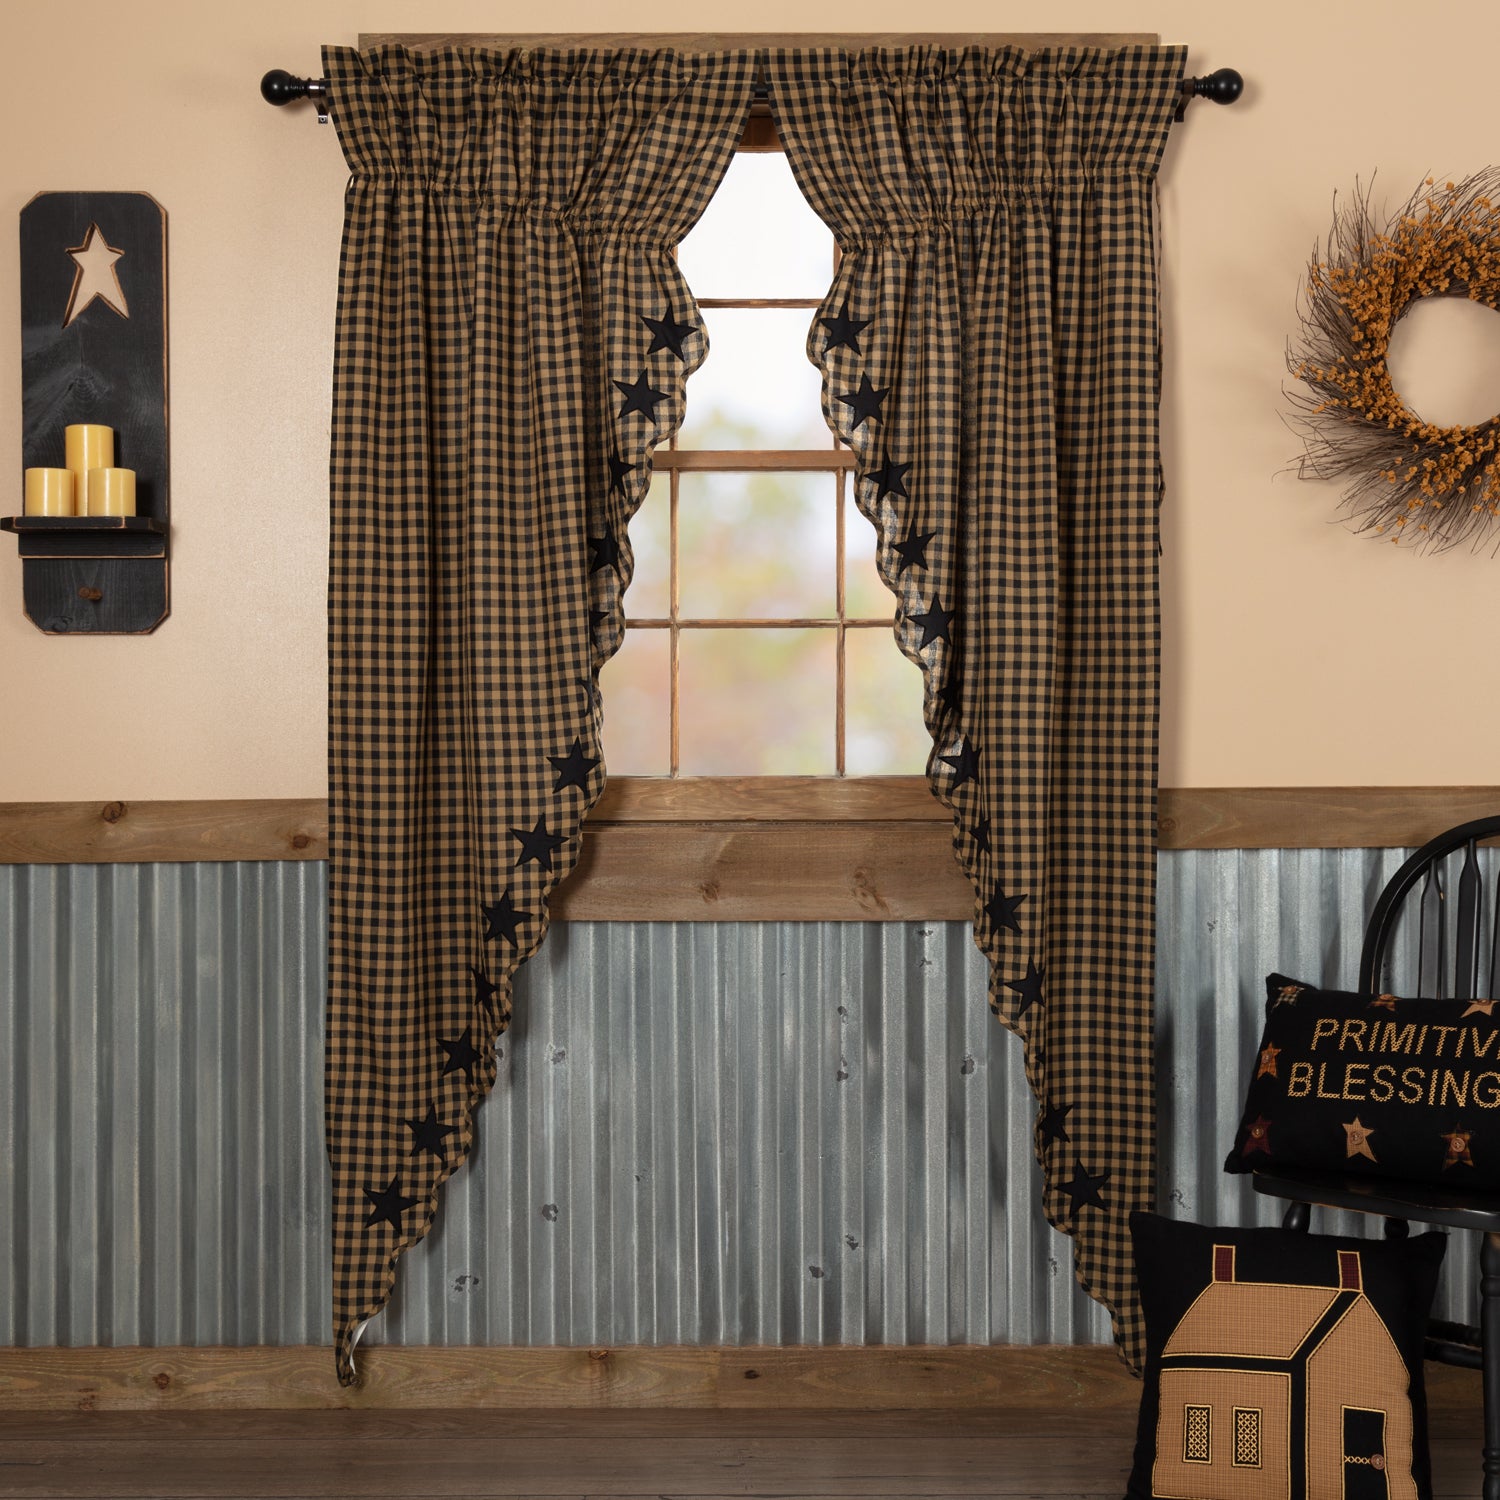 Primitive Prairie Panel Set Country Star Scalloped Window Curtains Vhc Brands Home Decor